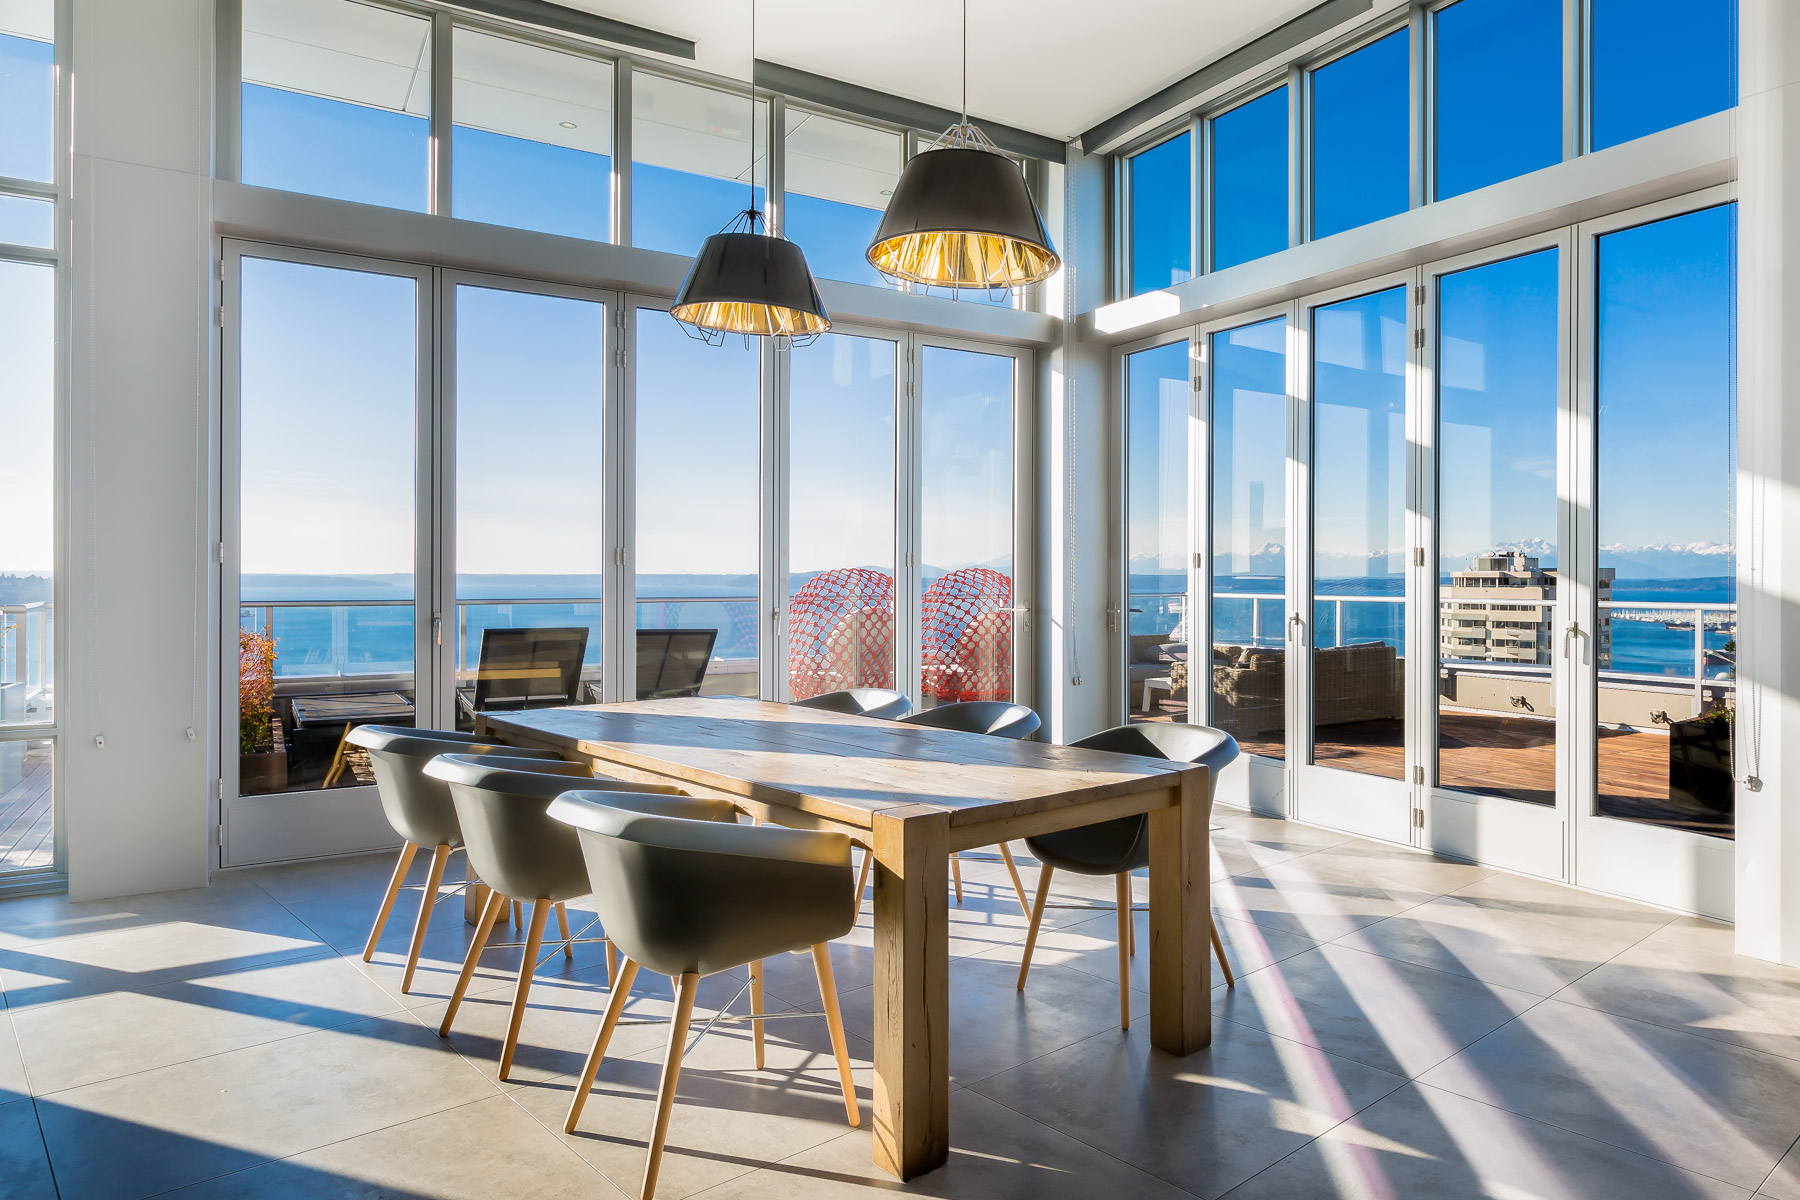 Penthouse Dining Room with ocean and mountain views